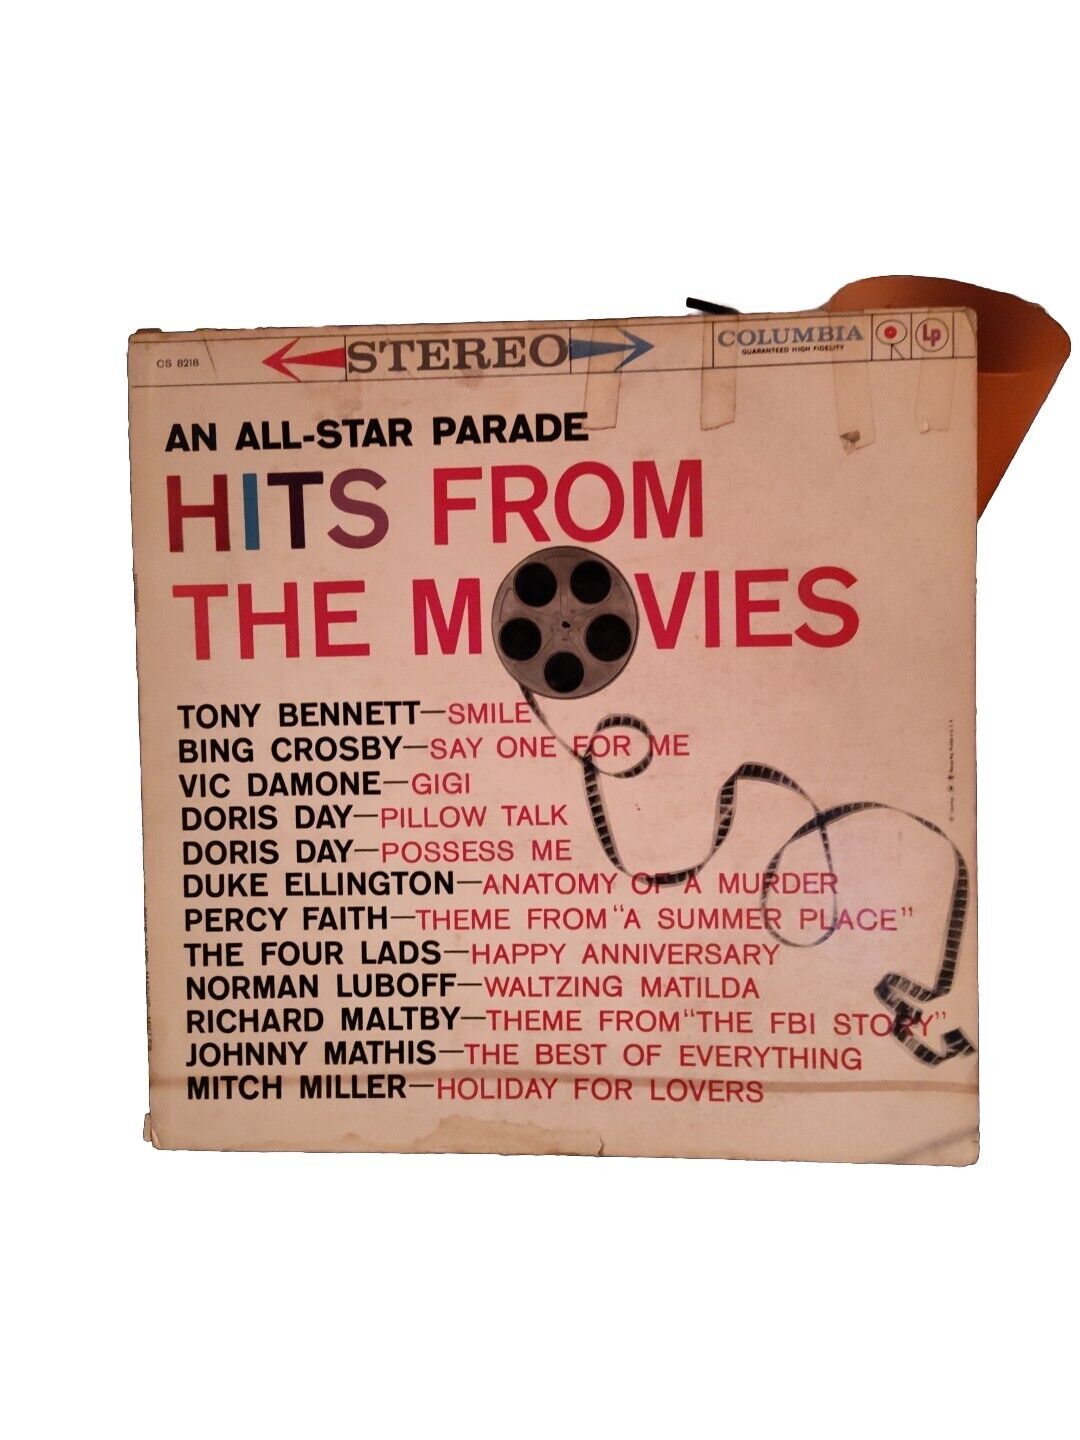 An All-star Parade Hits From The Movies 1959 CL-1421 Vinyl 12\'\' Vintage